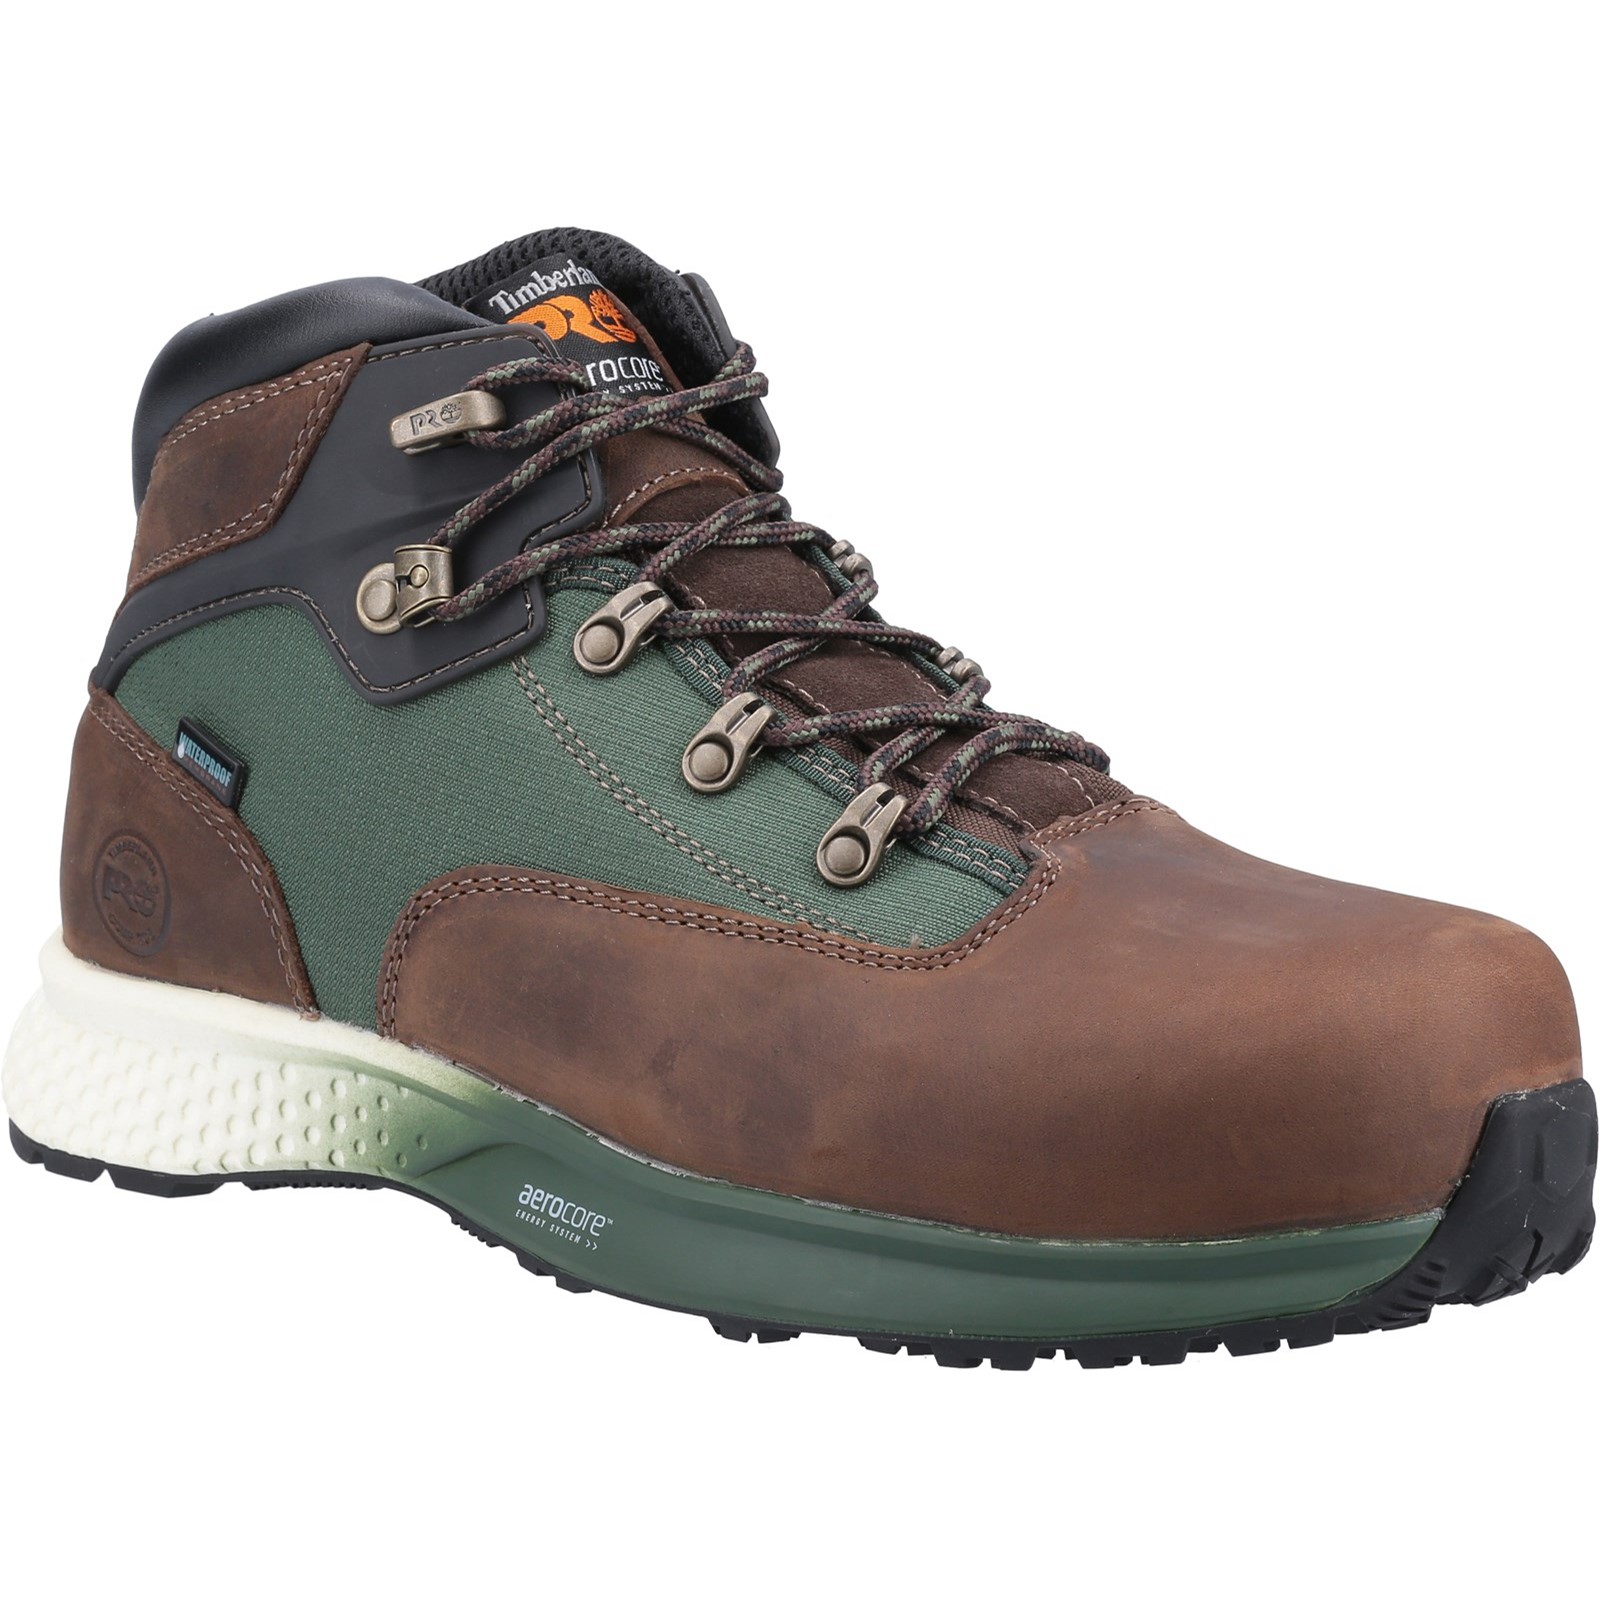 Euro Hiker Composite Safety Boot